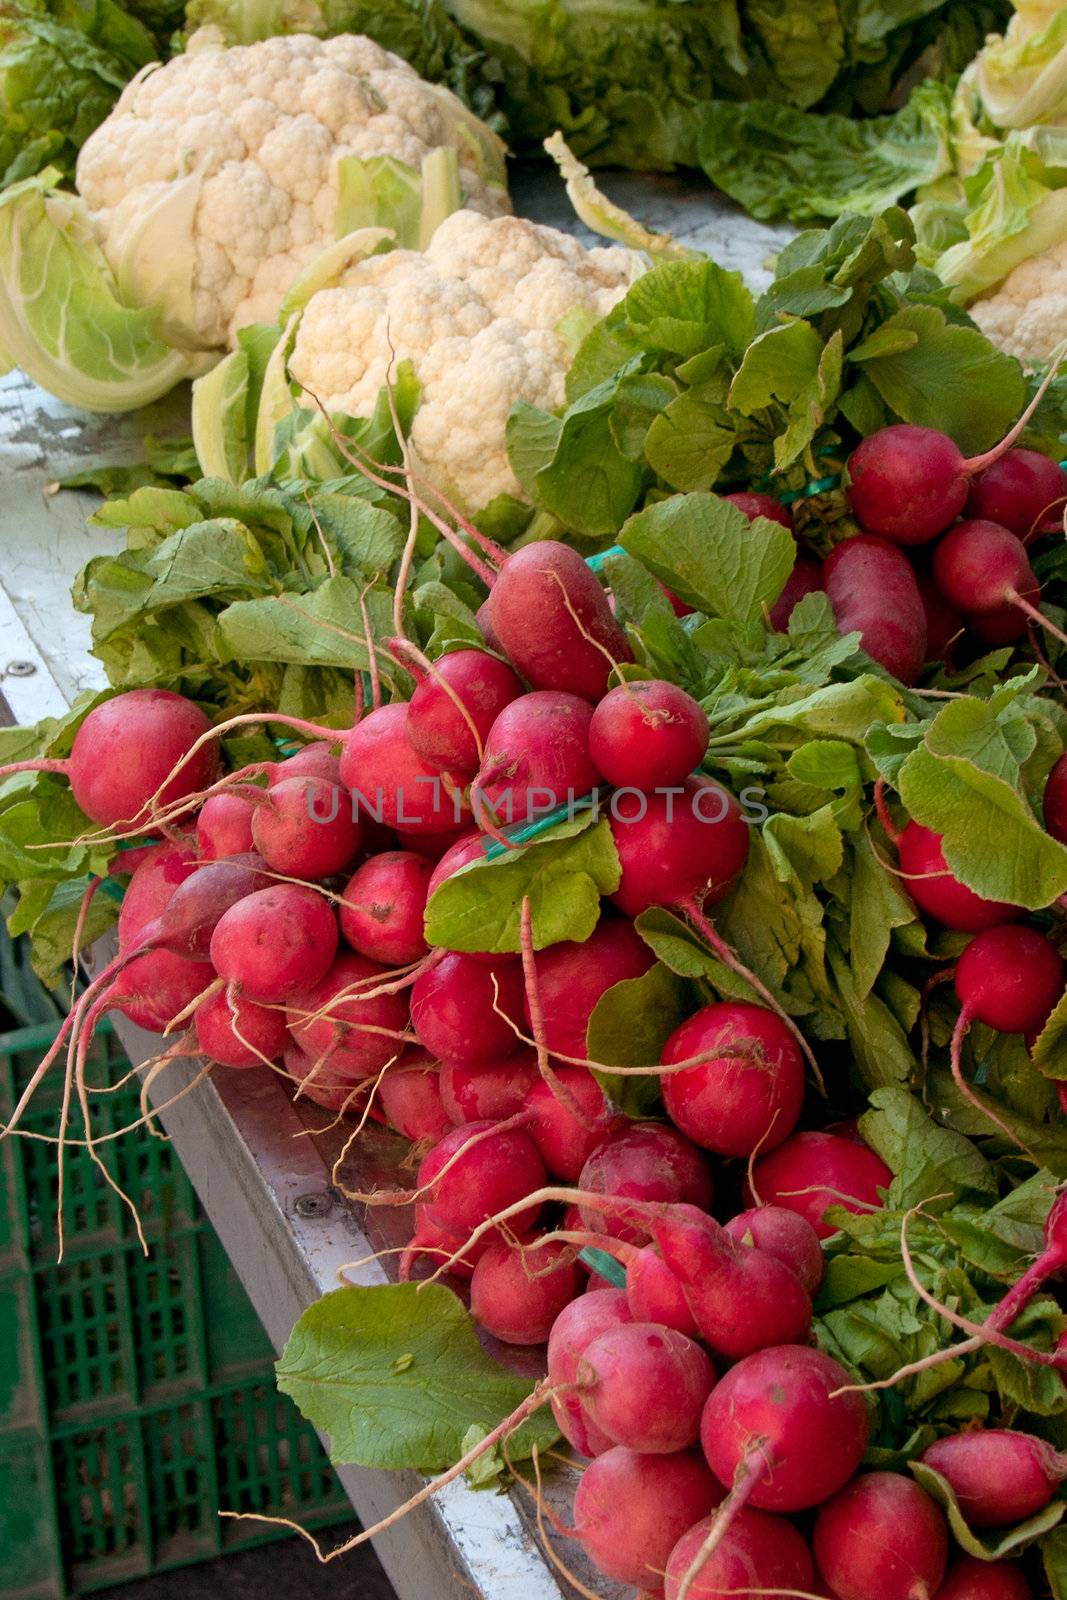 radishes and cauliflower at the local market